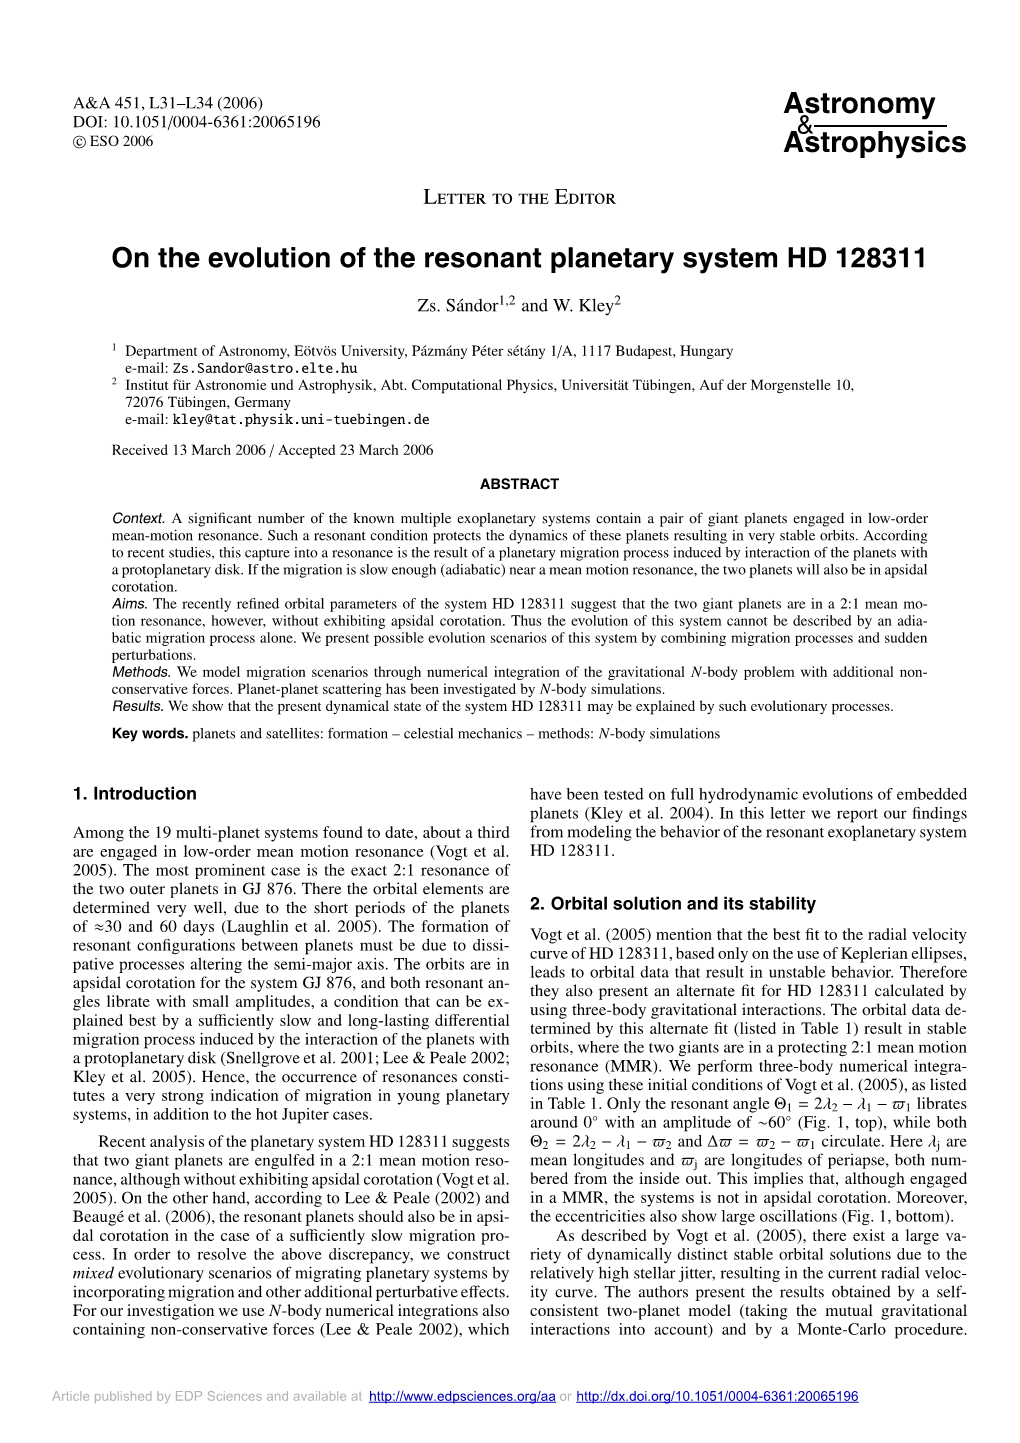 On the Evolution of the Resonant Planetary System HD 128311